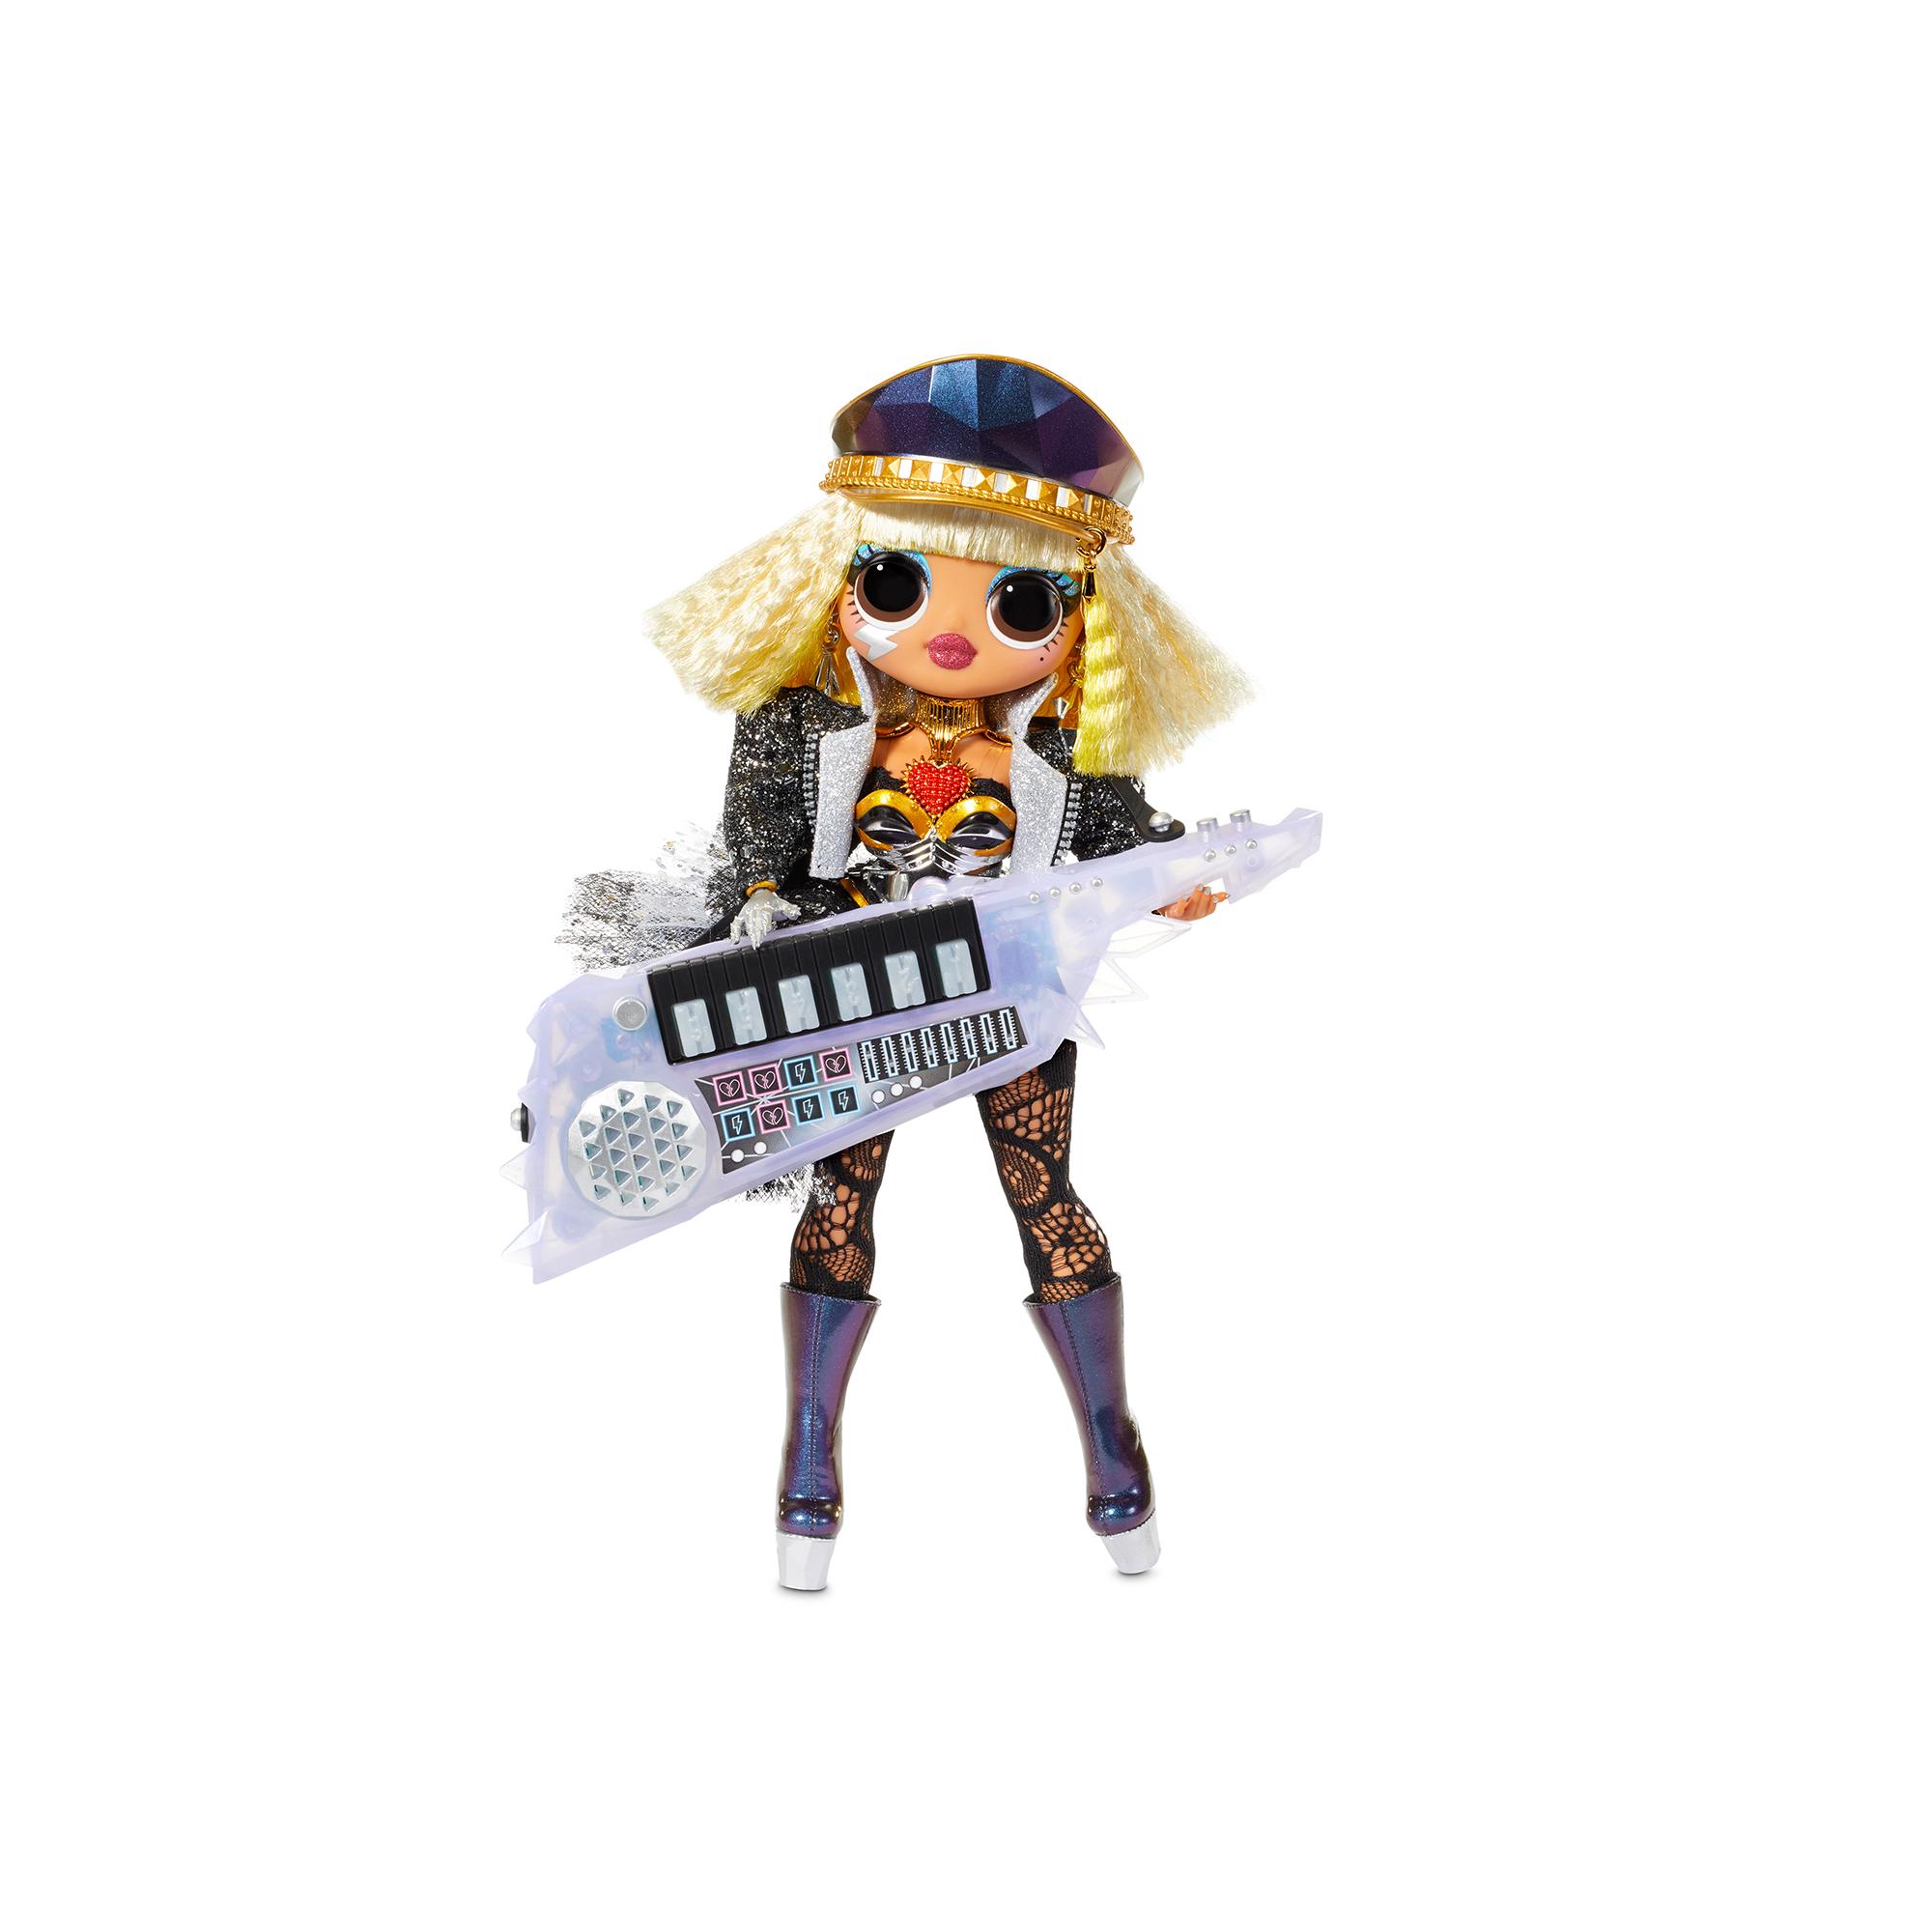 L.O.L. Surprise - OMG Remix Rock Doll - Fame Queen and Keytar